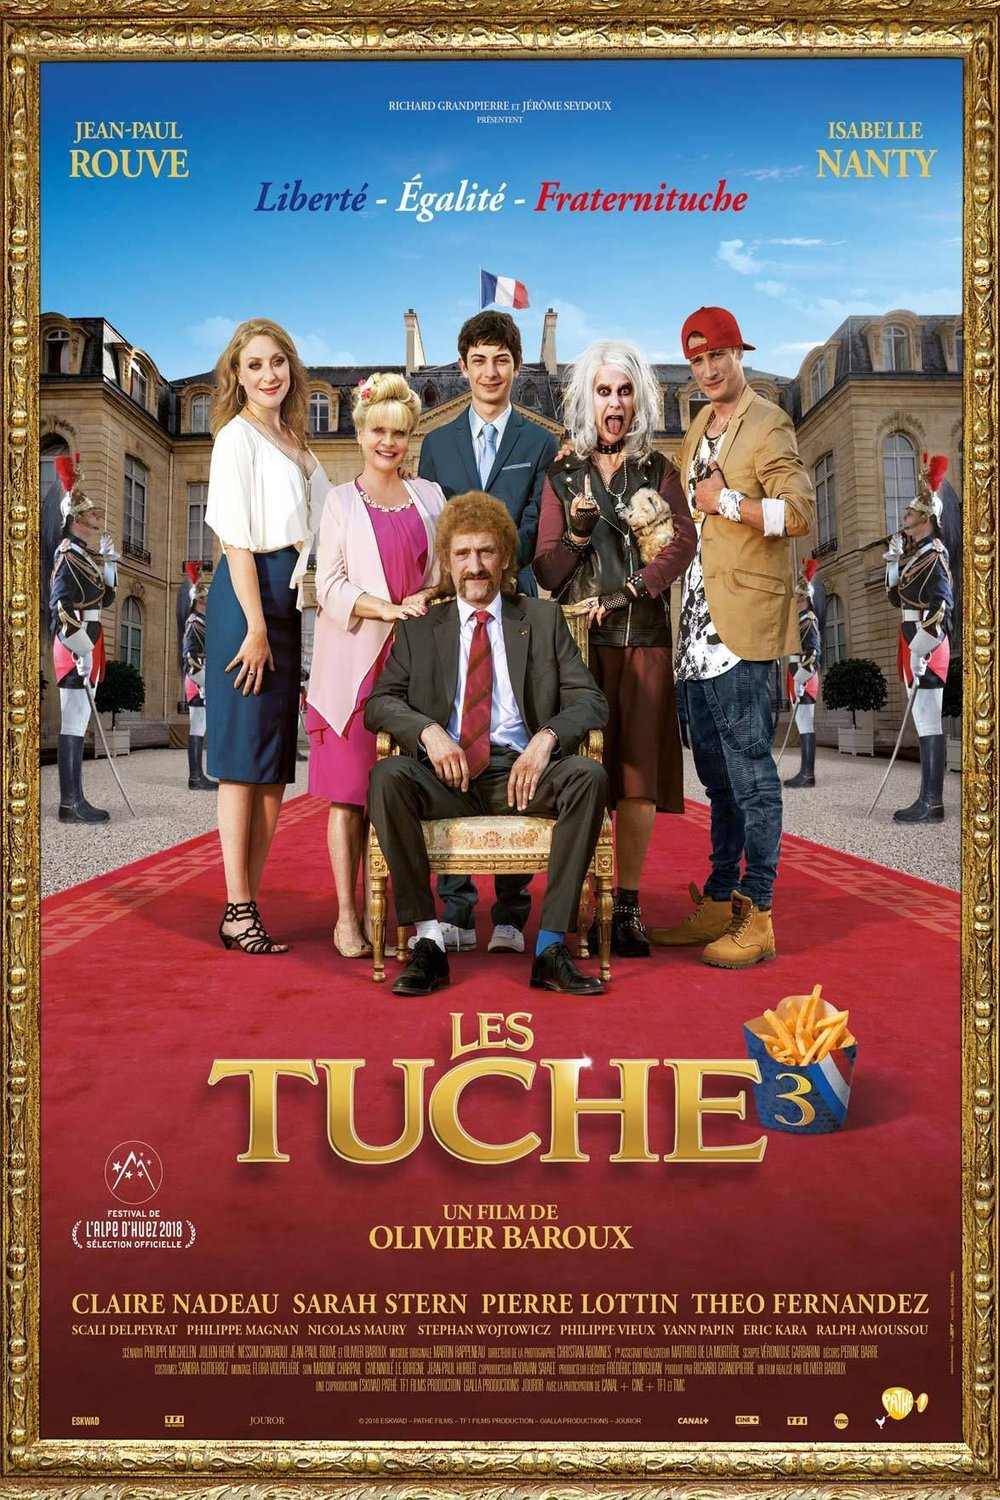 Poster of the movie Les Tuche 3